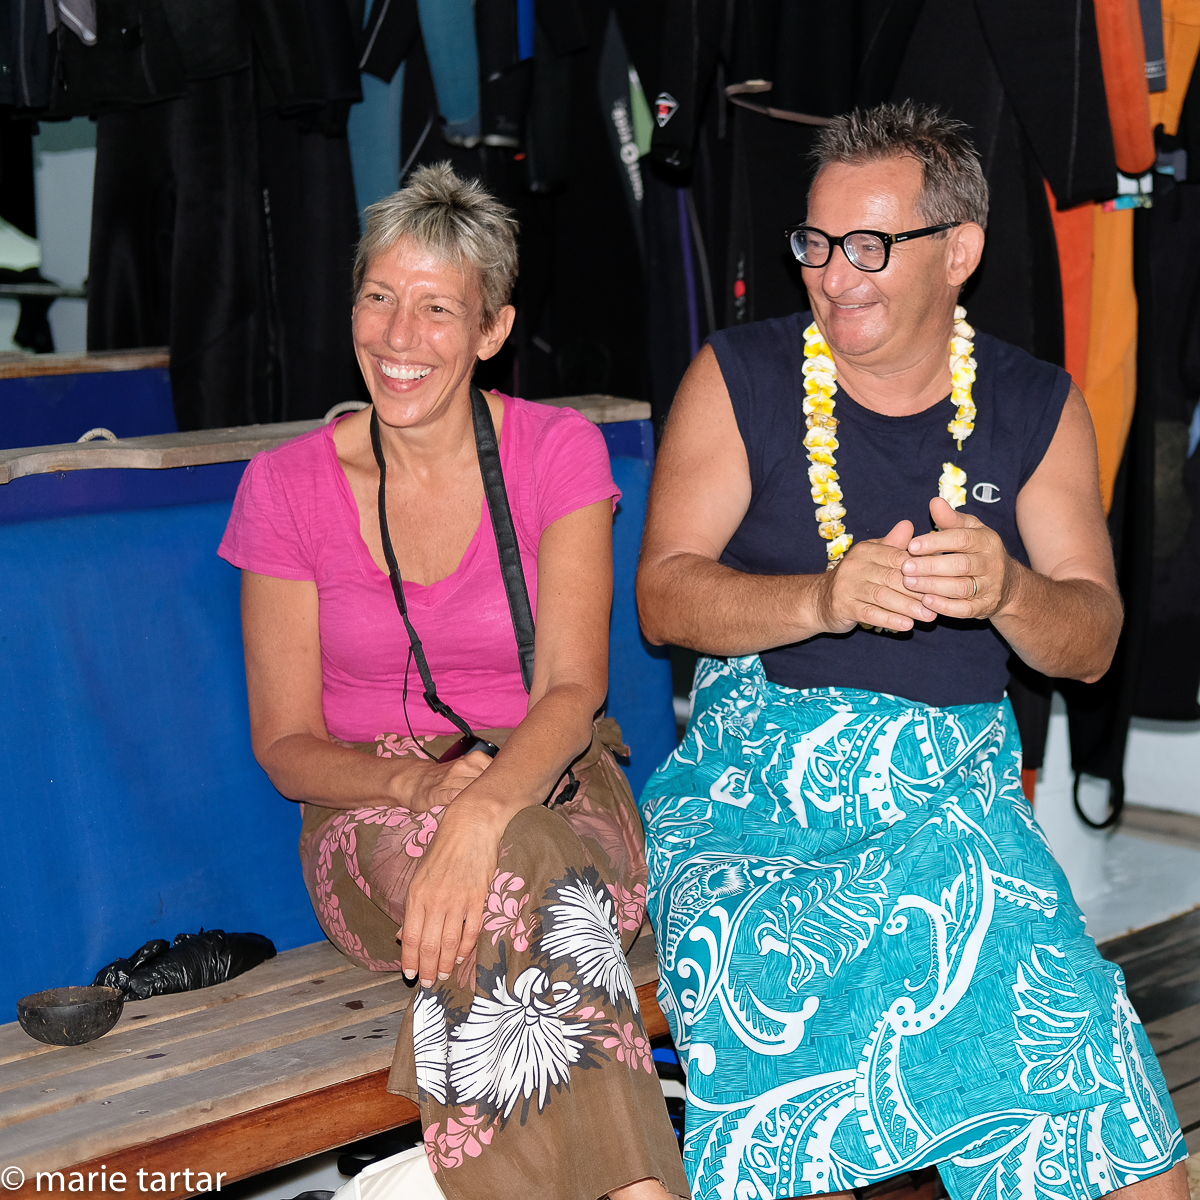 The appreciative audience on the Nai'a's dive deck included chef Pascal and hand thearapist Sharon from Florida